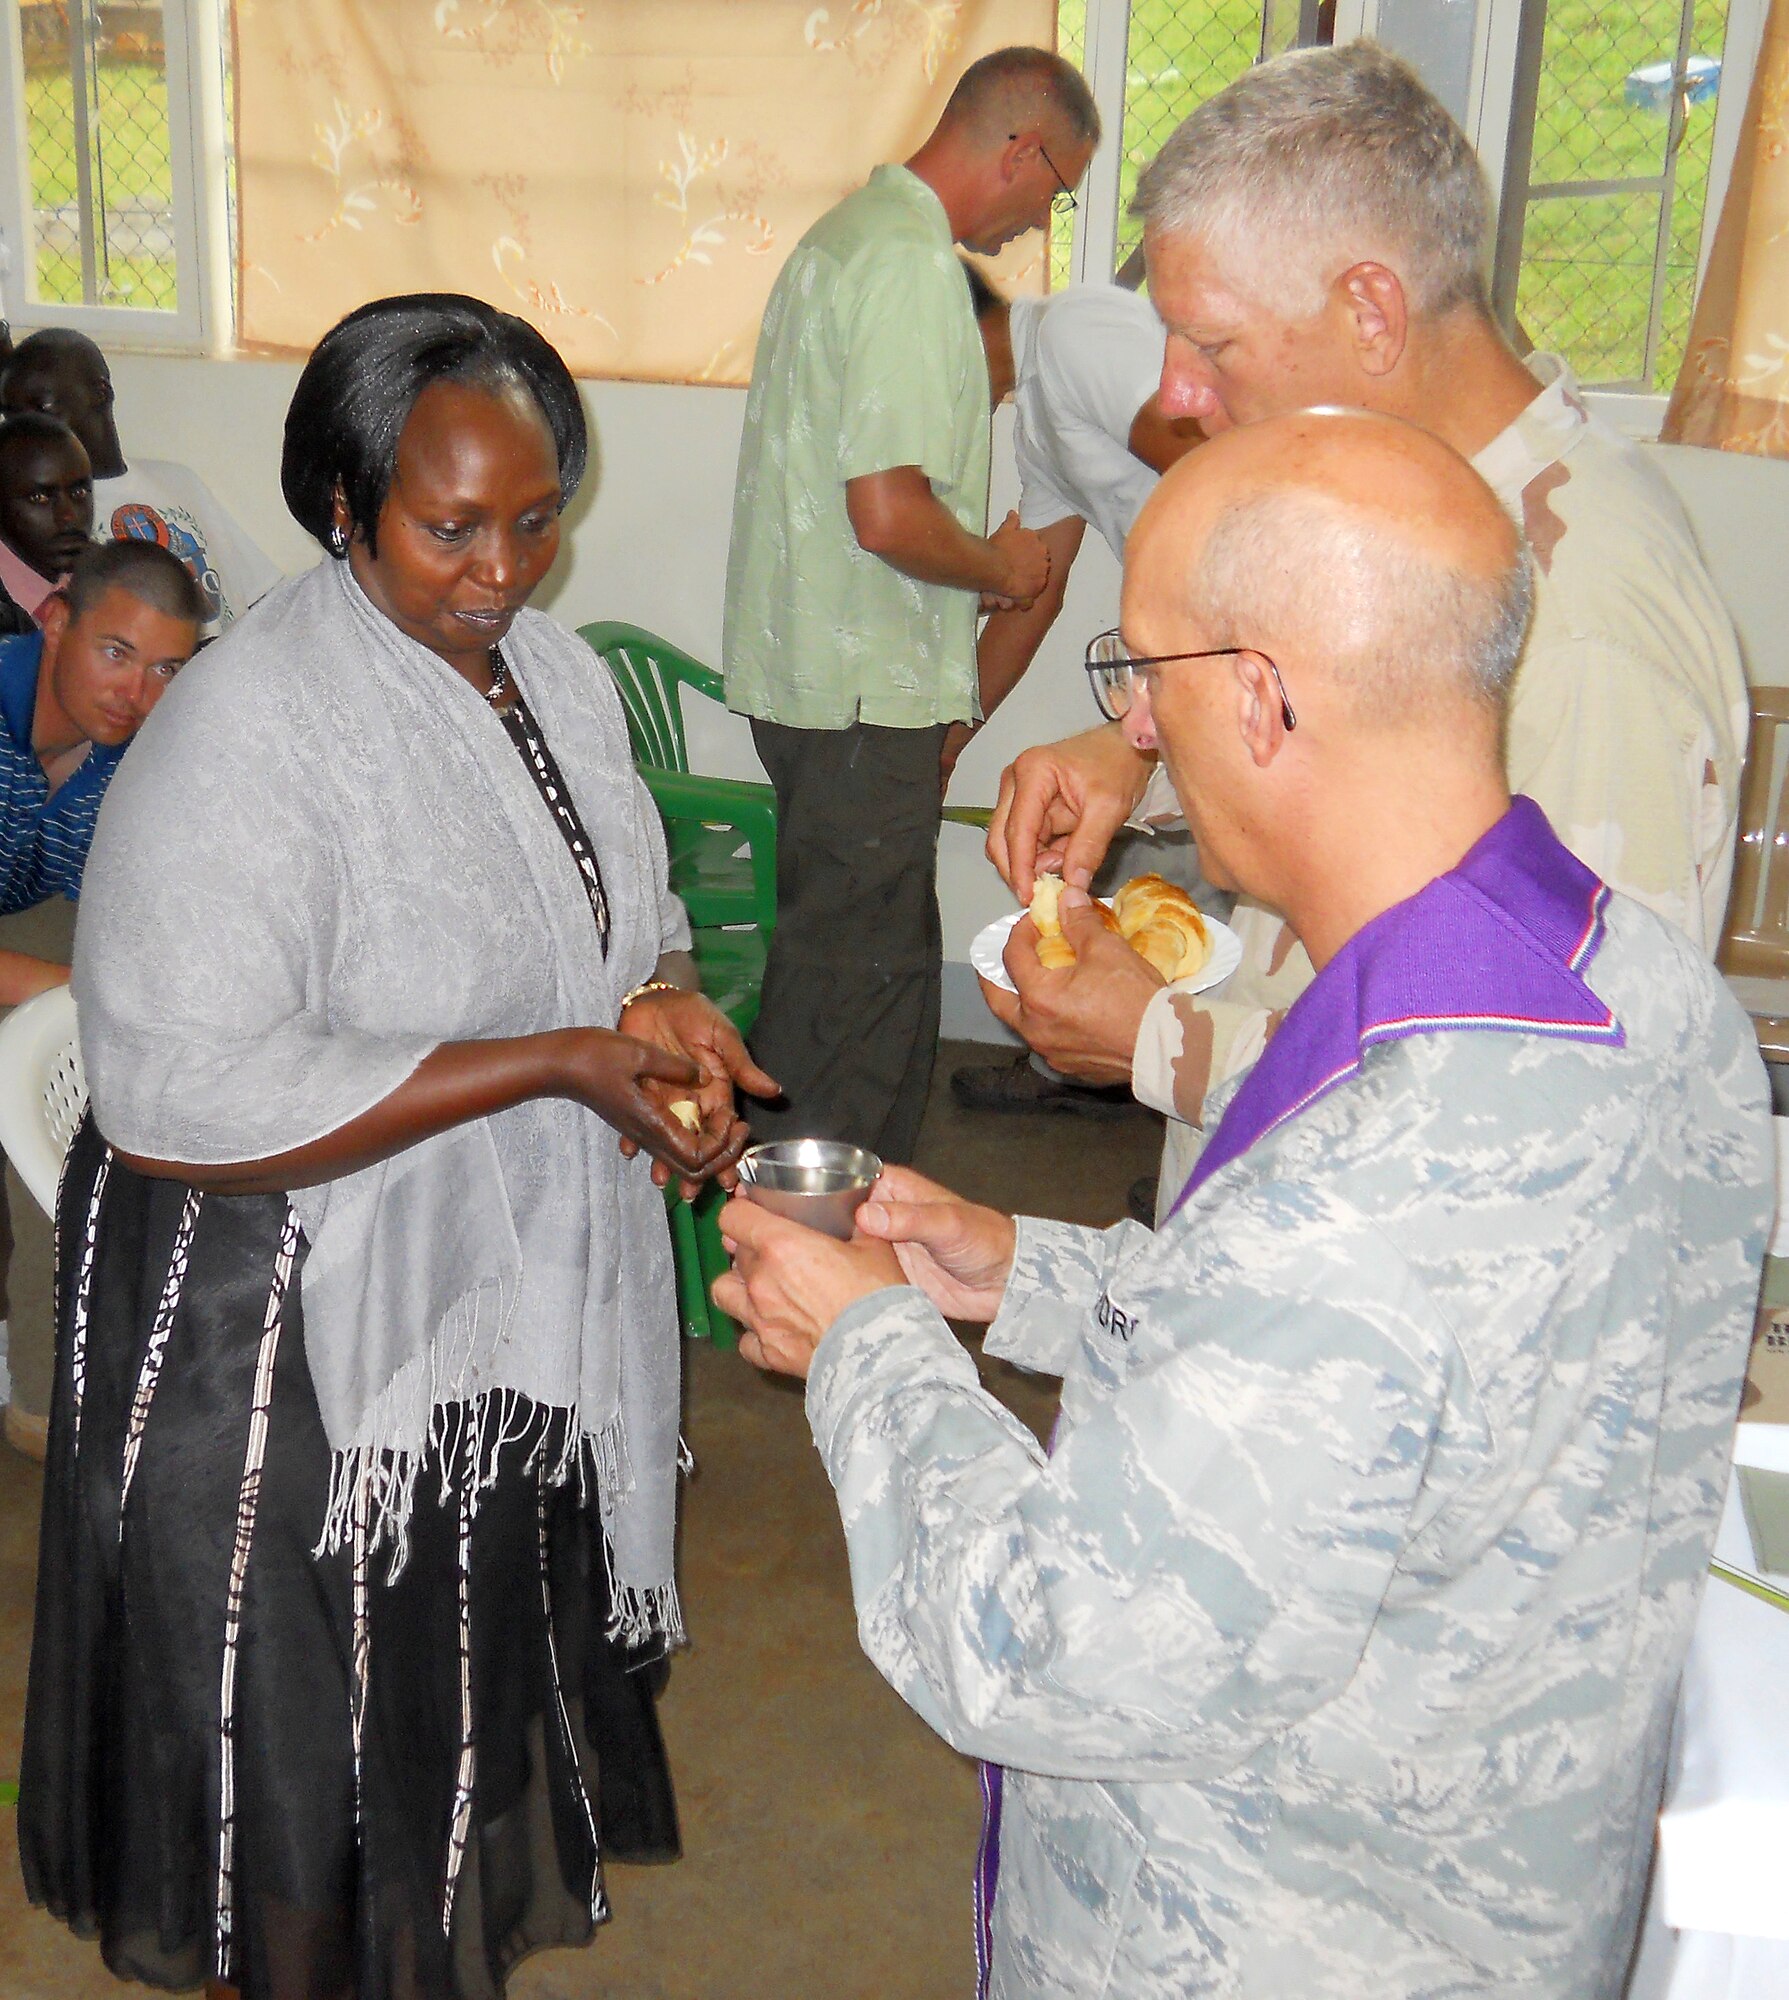 Rose Kagyinea, a contractor supervisor at Camp Kesenyi, Uganda, prepares to take Communion on Palm Sunday at the camp. Combined Joint Task Force-Horn of Africa Chaplain (Lt. Col.) David Terrinoni, bottom right, and Chaplain (Cmdr.) Stephen Beyer led the service for members of the CJTF-HOA cadre, U.S. Embassy personnel and Ugandan Peoples Defense Force soldiers. (Air Force photo by Maj. Khalid Cannon)